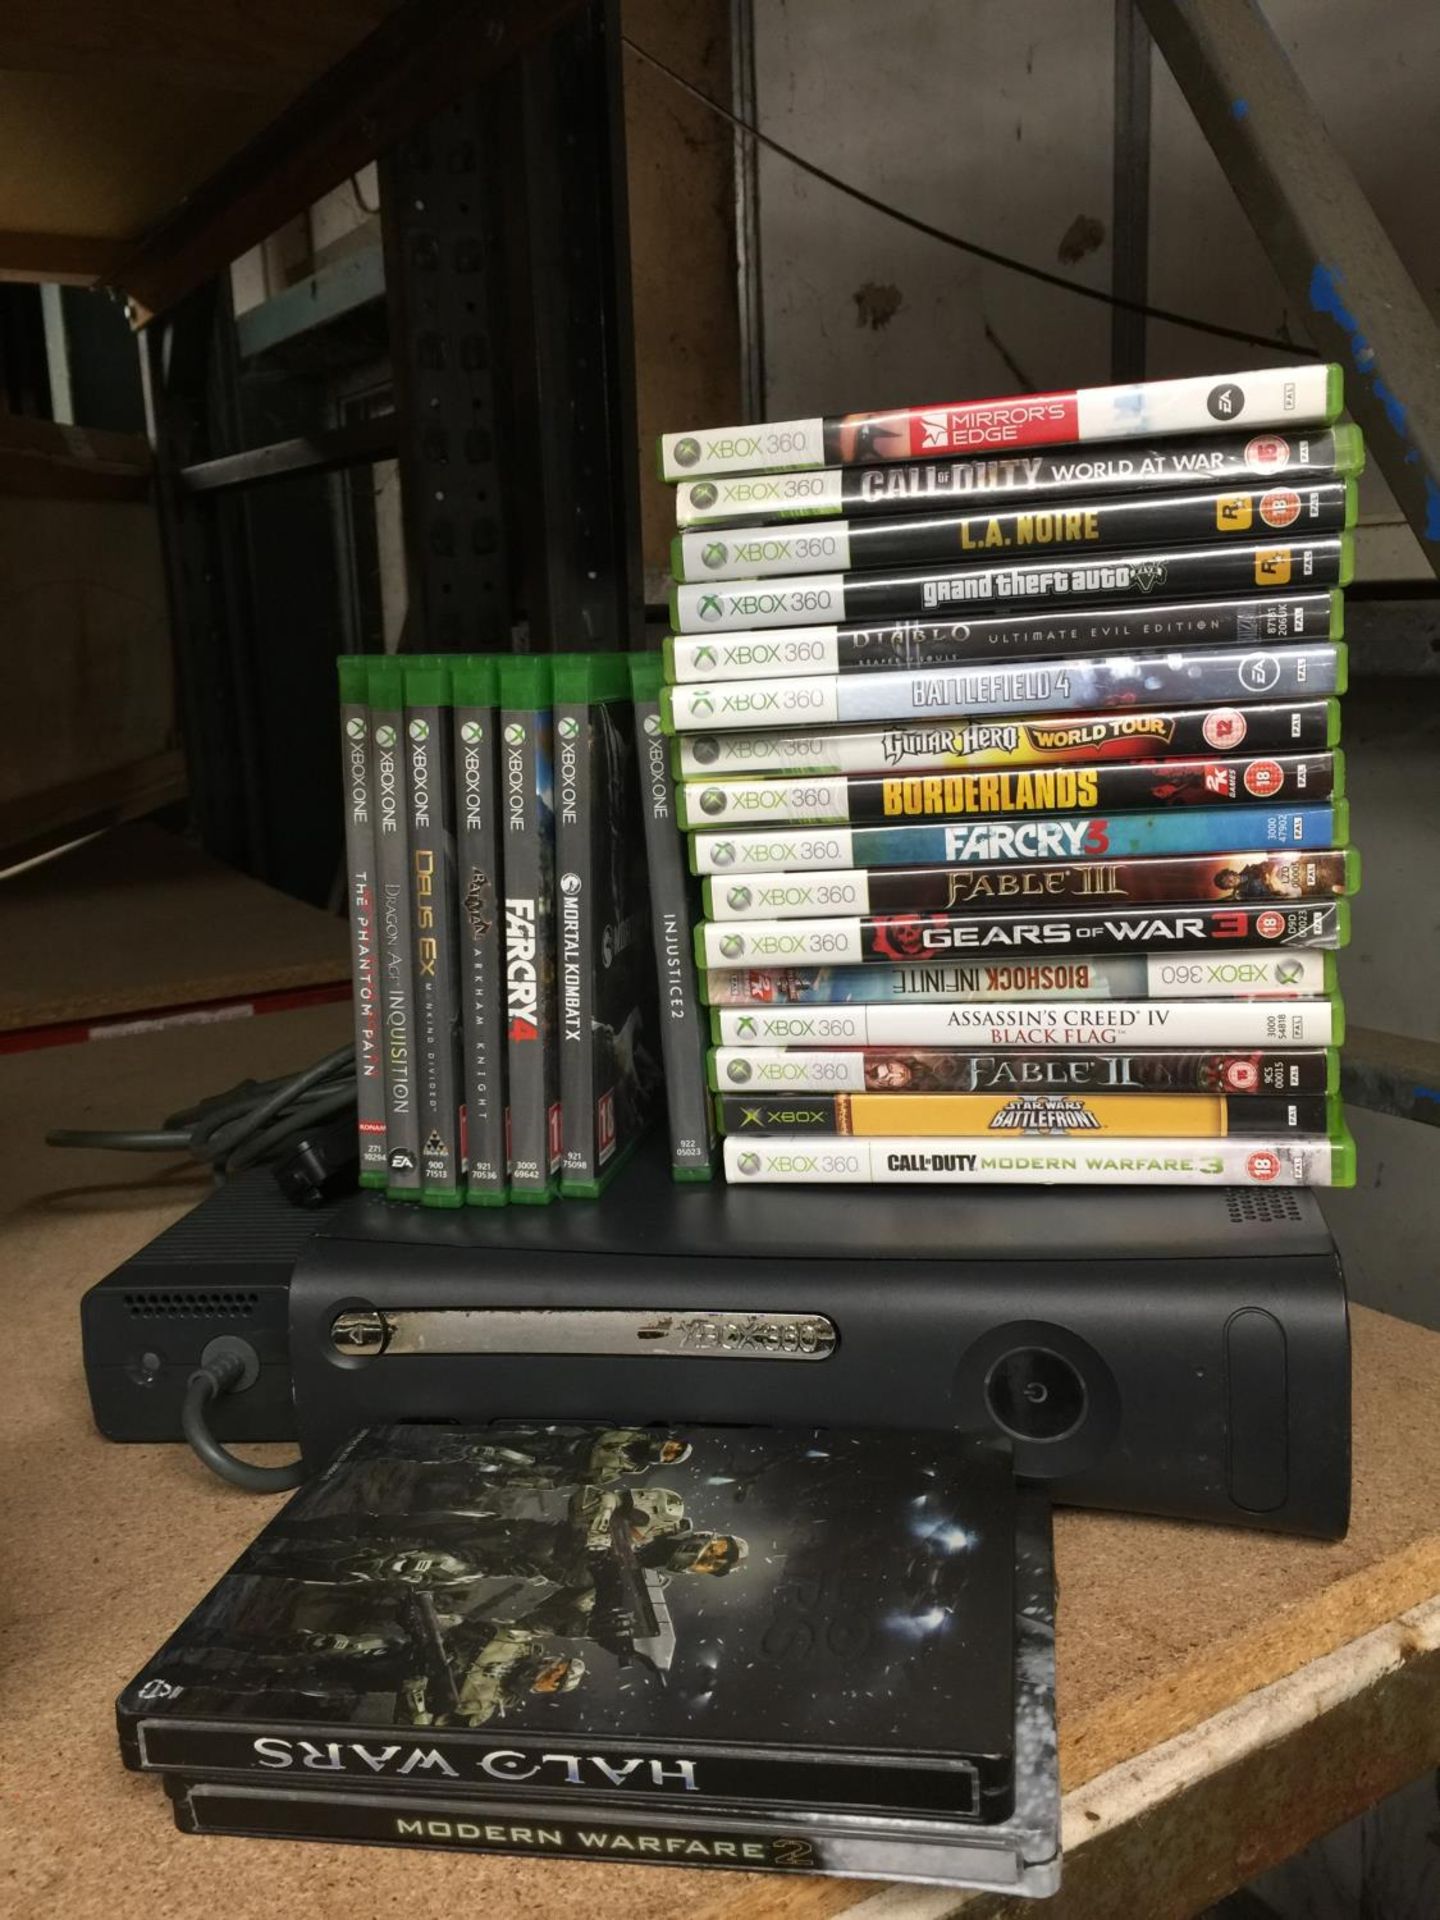 AN XBOX 360 WITH A QUANTITY OF GAMES TO INCLUDE, HALO WARS, MODERN WARFARE, FABLE II, CALL OF